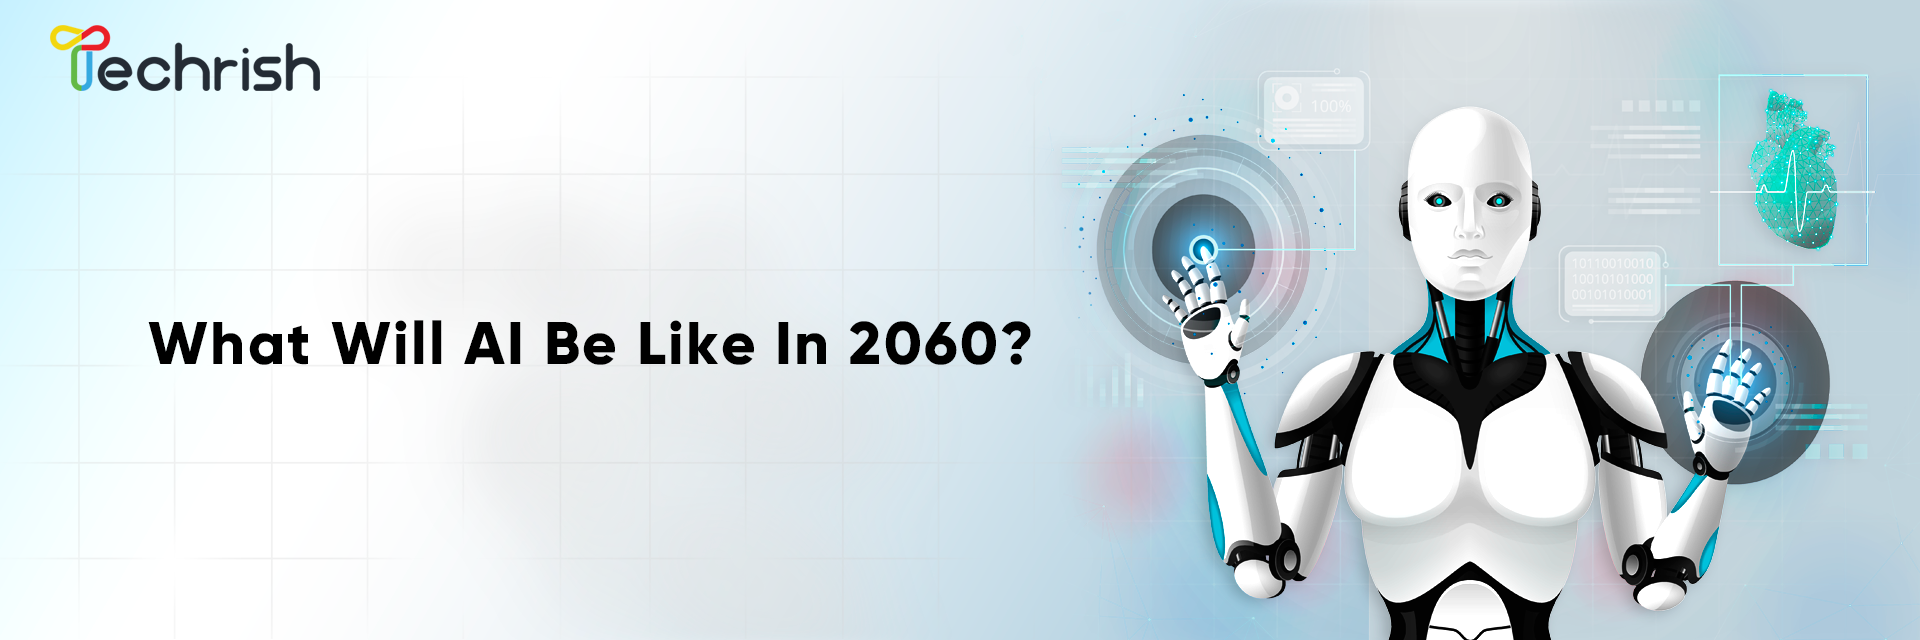 What Will AI Be Like In 2060?